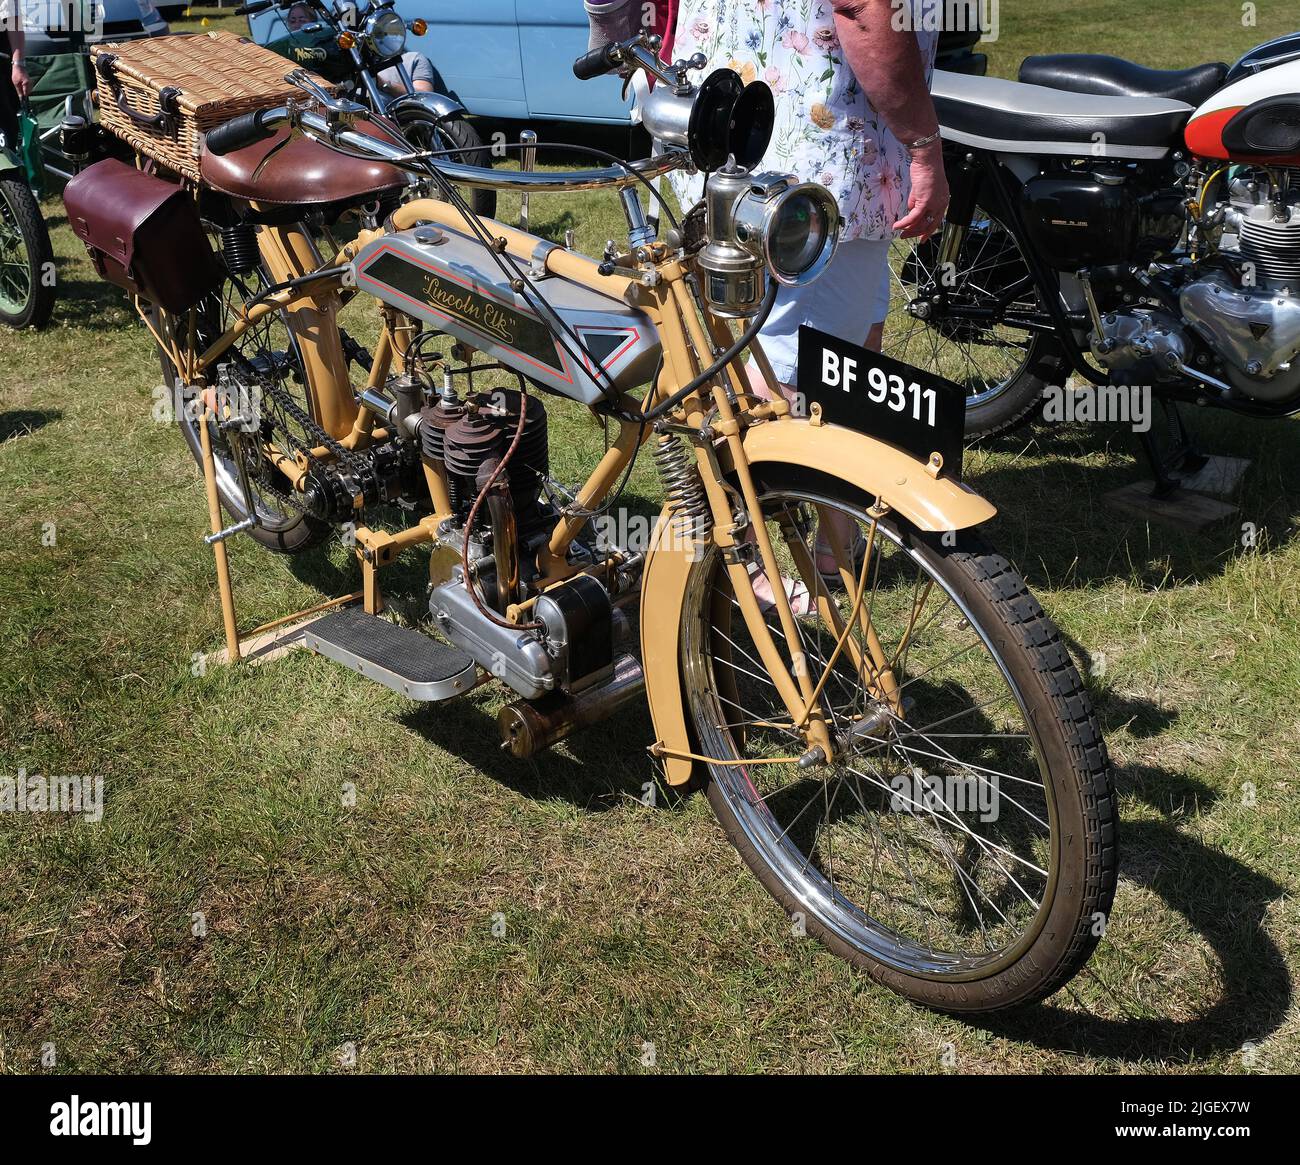 Vintage motor cycles on display at county show. Stock Photo